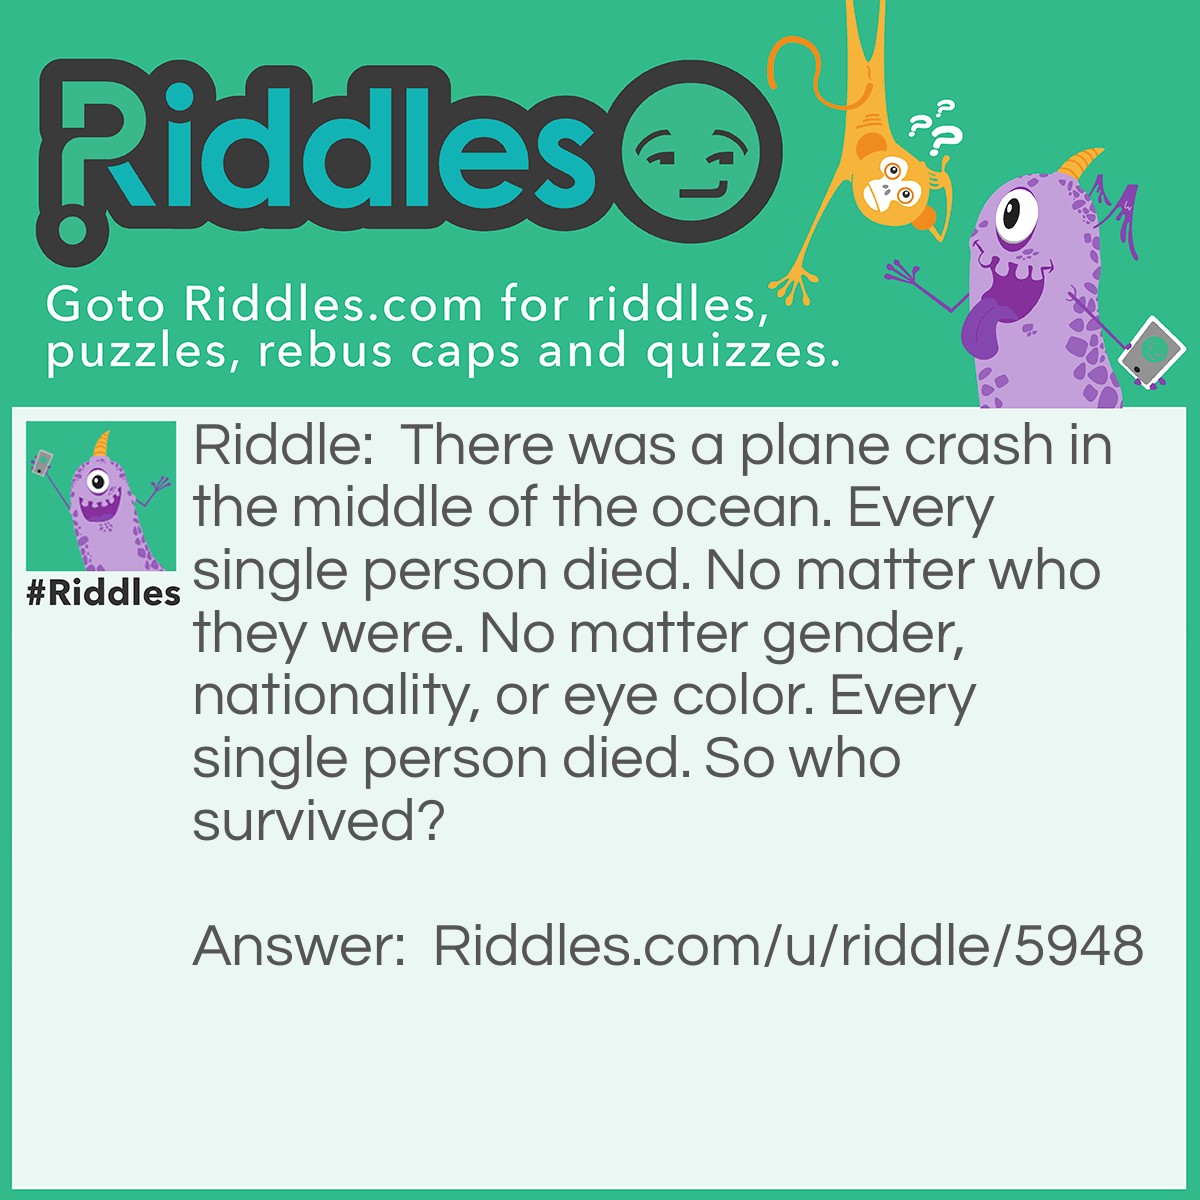 Riddle: There was a plane crash in the middle of the ocean. Every single person died. No matter who they were. No matter gender, nationality, or eye color. Every single person died. So who survived? Answer: Married couples.